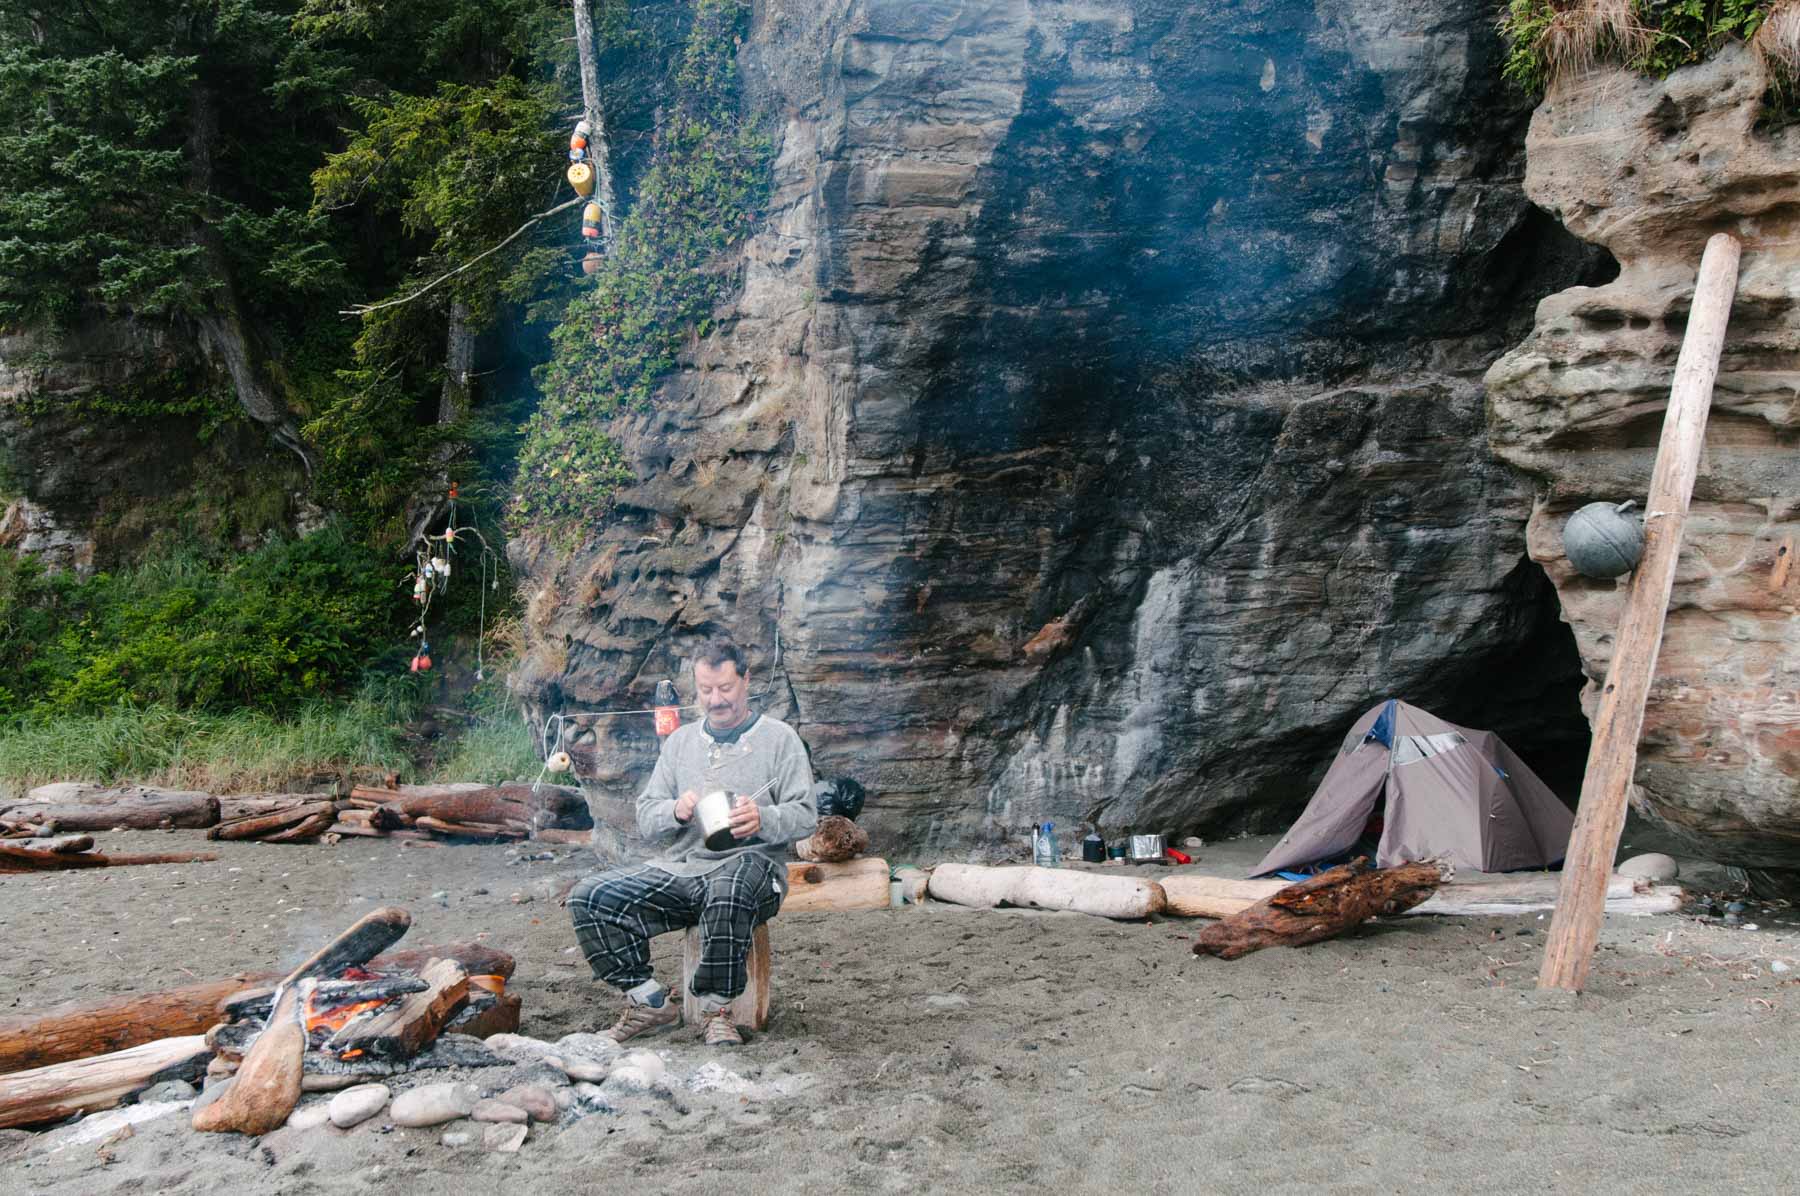 Camping out on the beaches of Vancouver Island